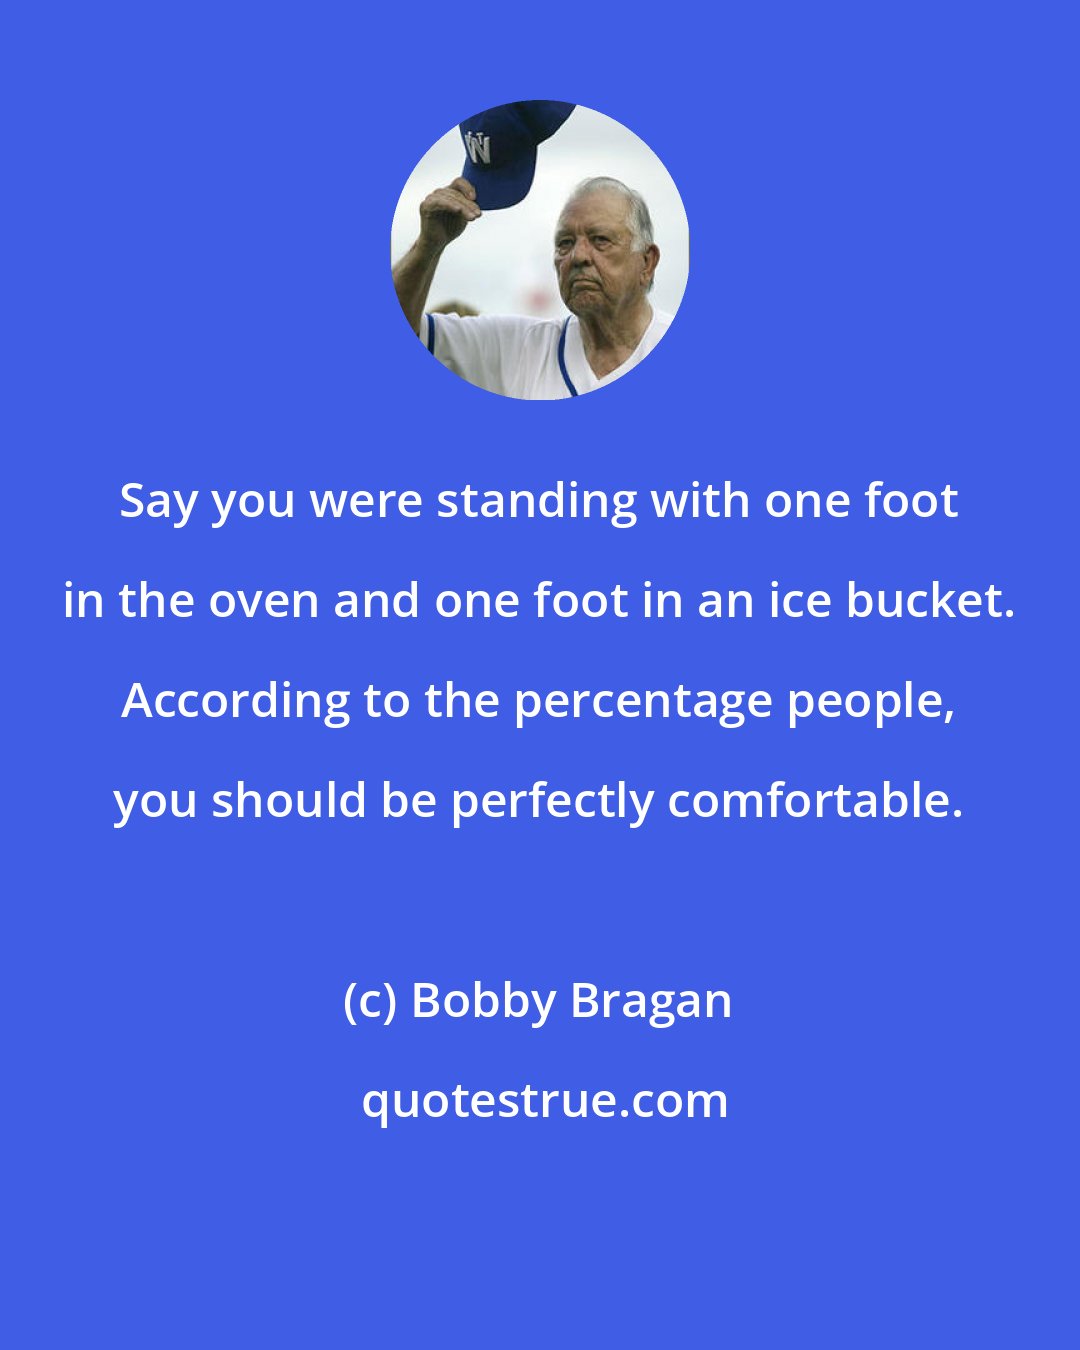 Bobby Bragan: Say you were standing with one foot in the oven and one foot in an ice bucket. According to the percentage people, you should be perfectly comfortable.